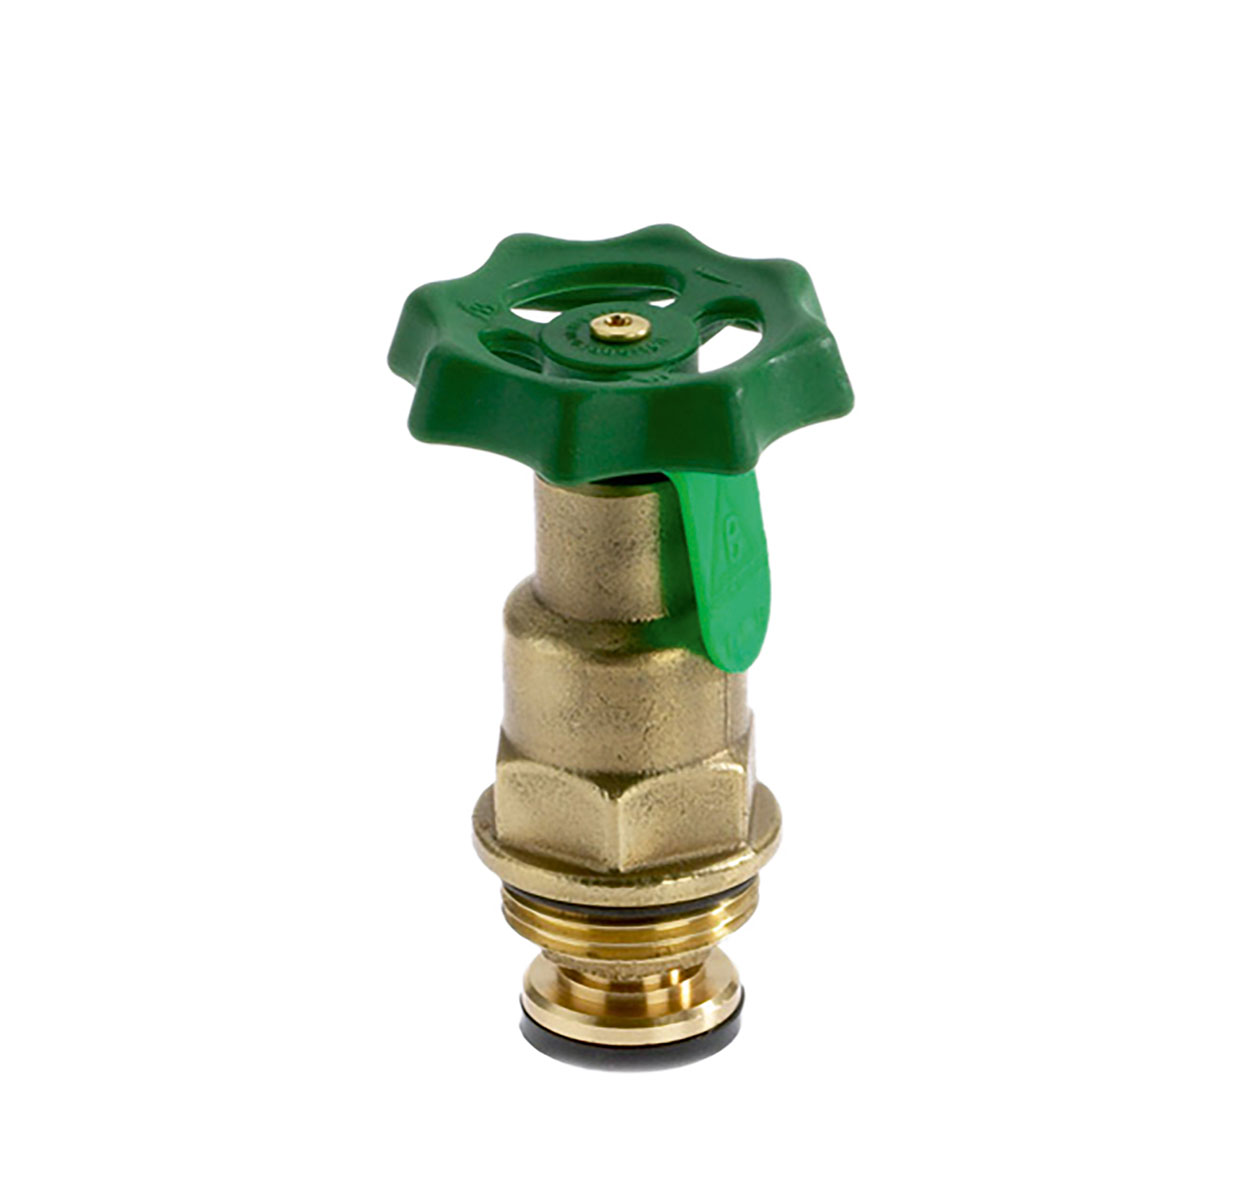 1215320 - Brass Upper-part with grease chamber for Combined Free-flow and Backflow-preventer valves, not-rising spindle